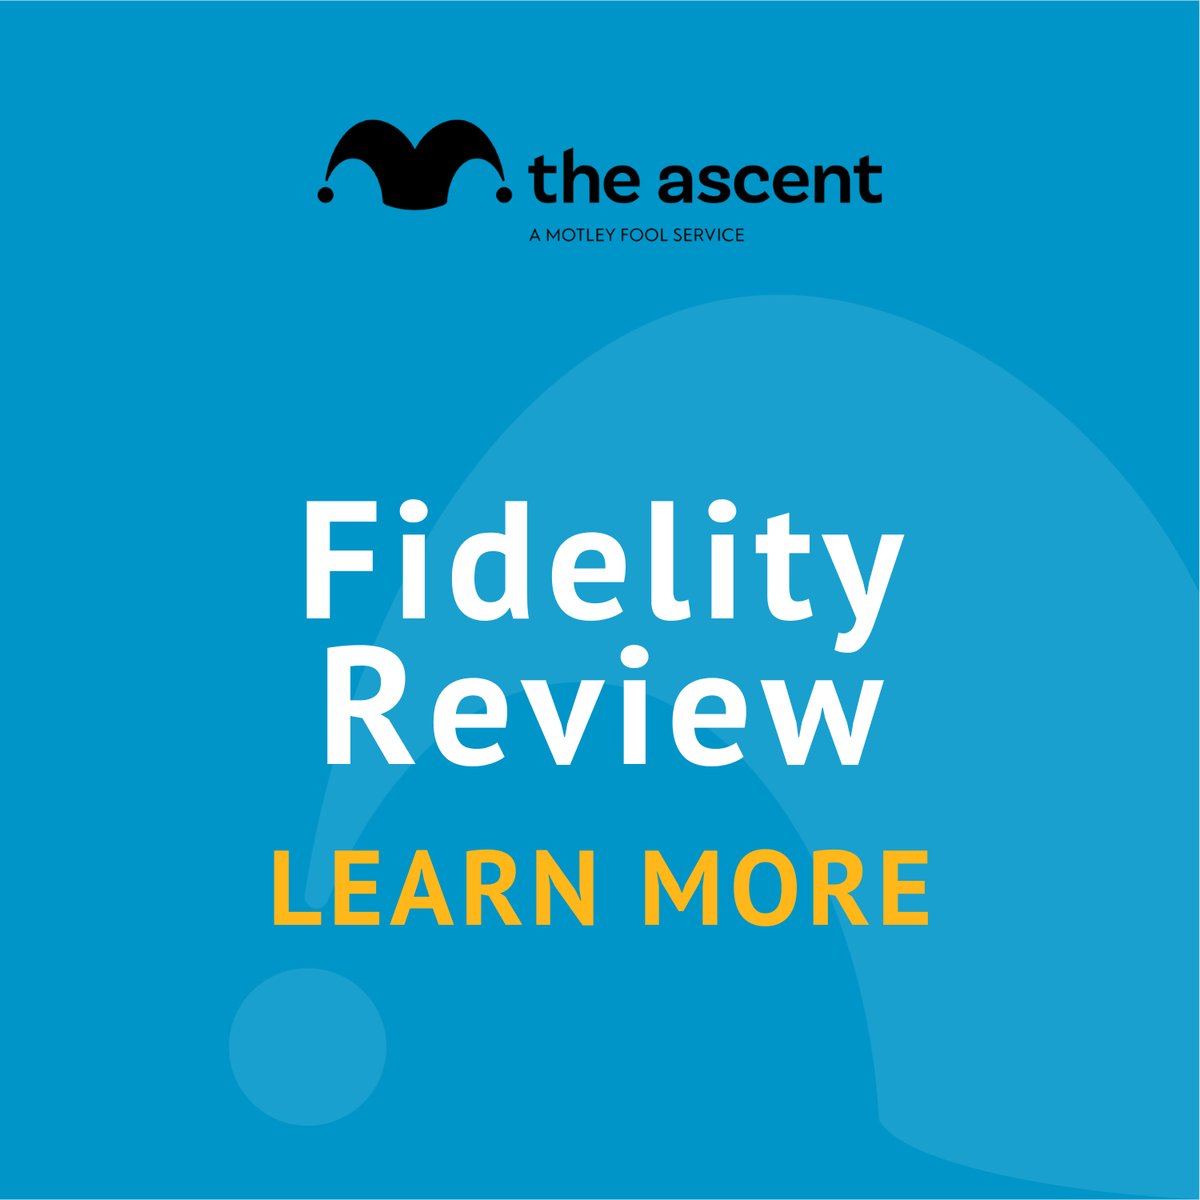 Fidelity Review